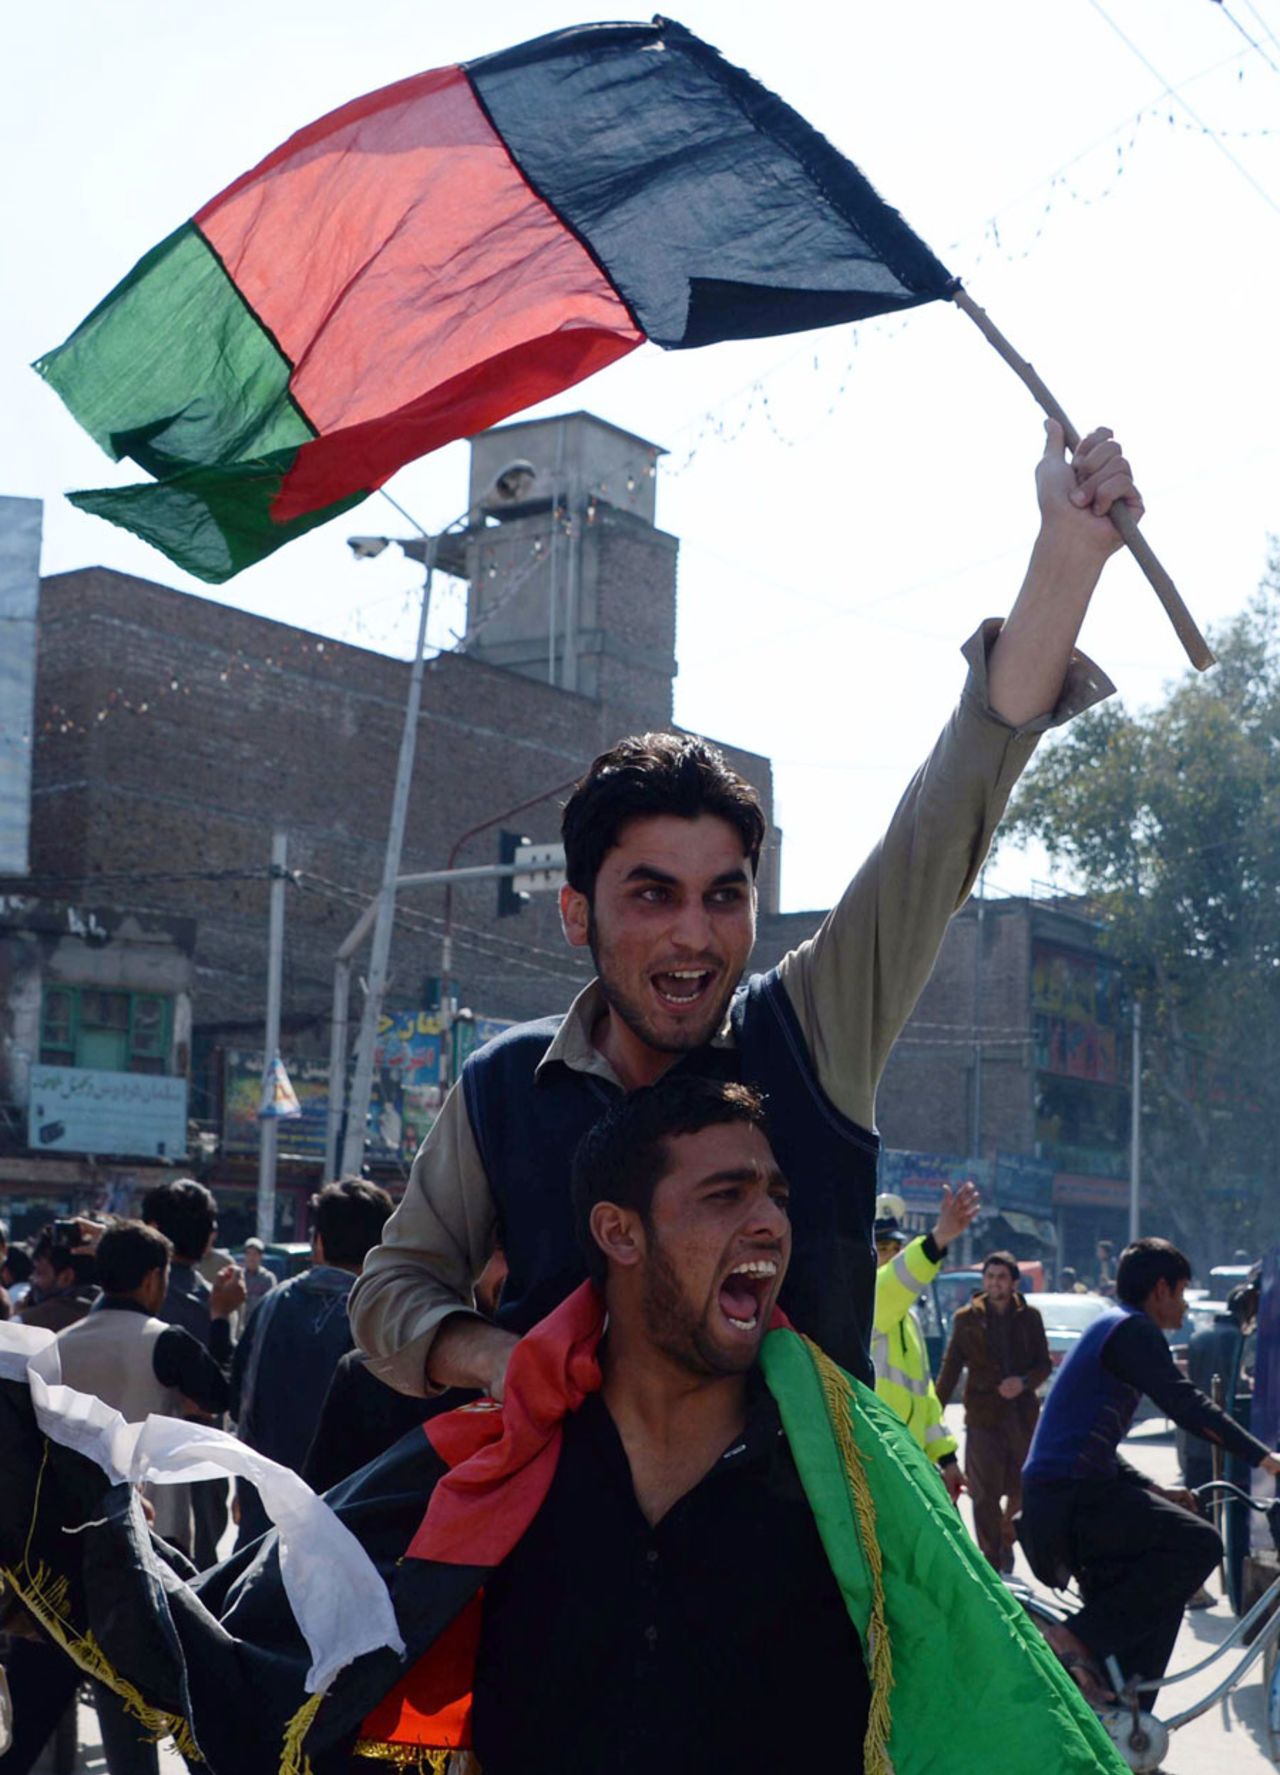 Fans celebrate Afghanistan's World Cup win over Scotland, Jalalabad, February 26, 2015